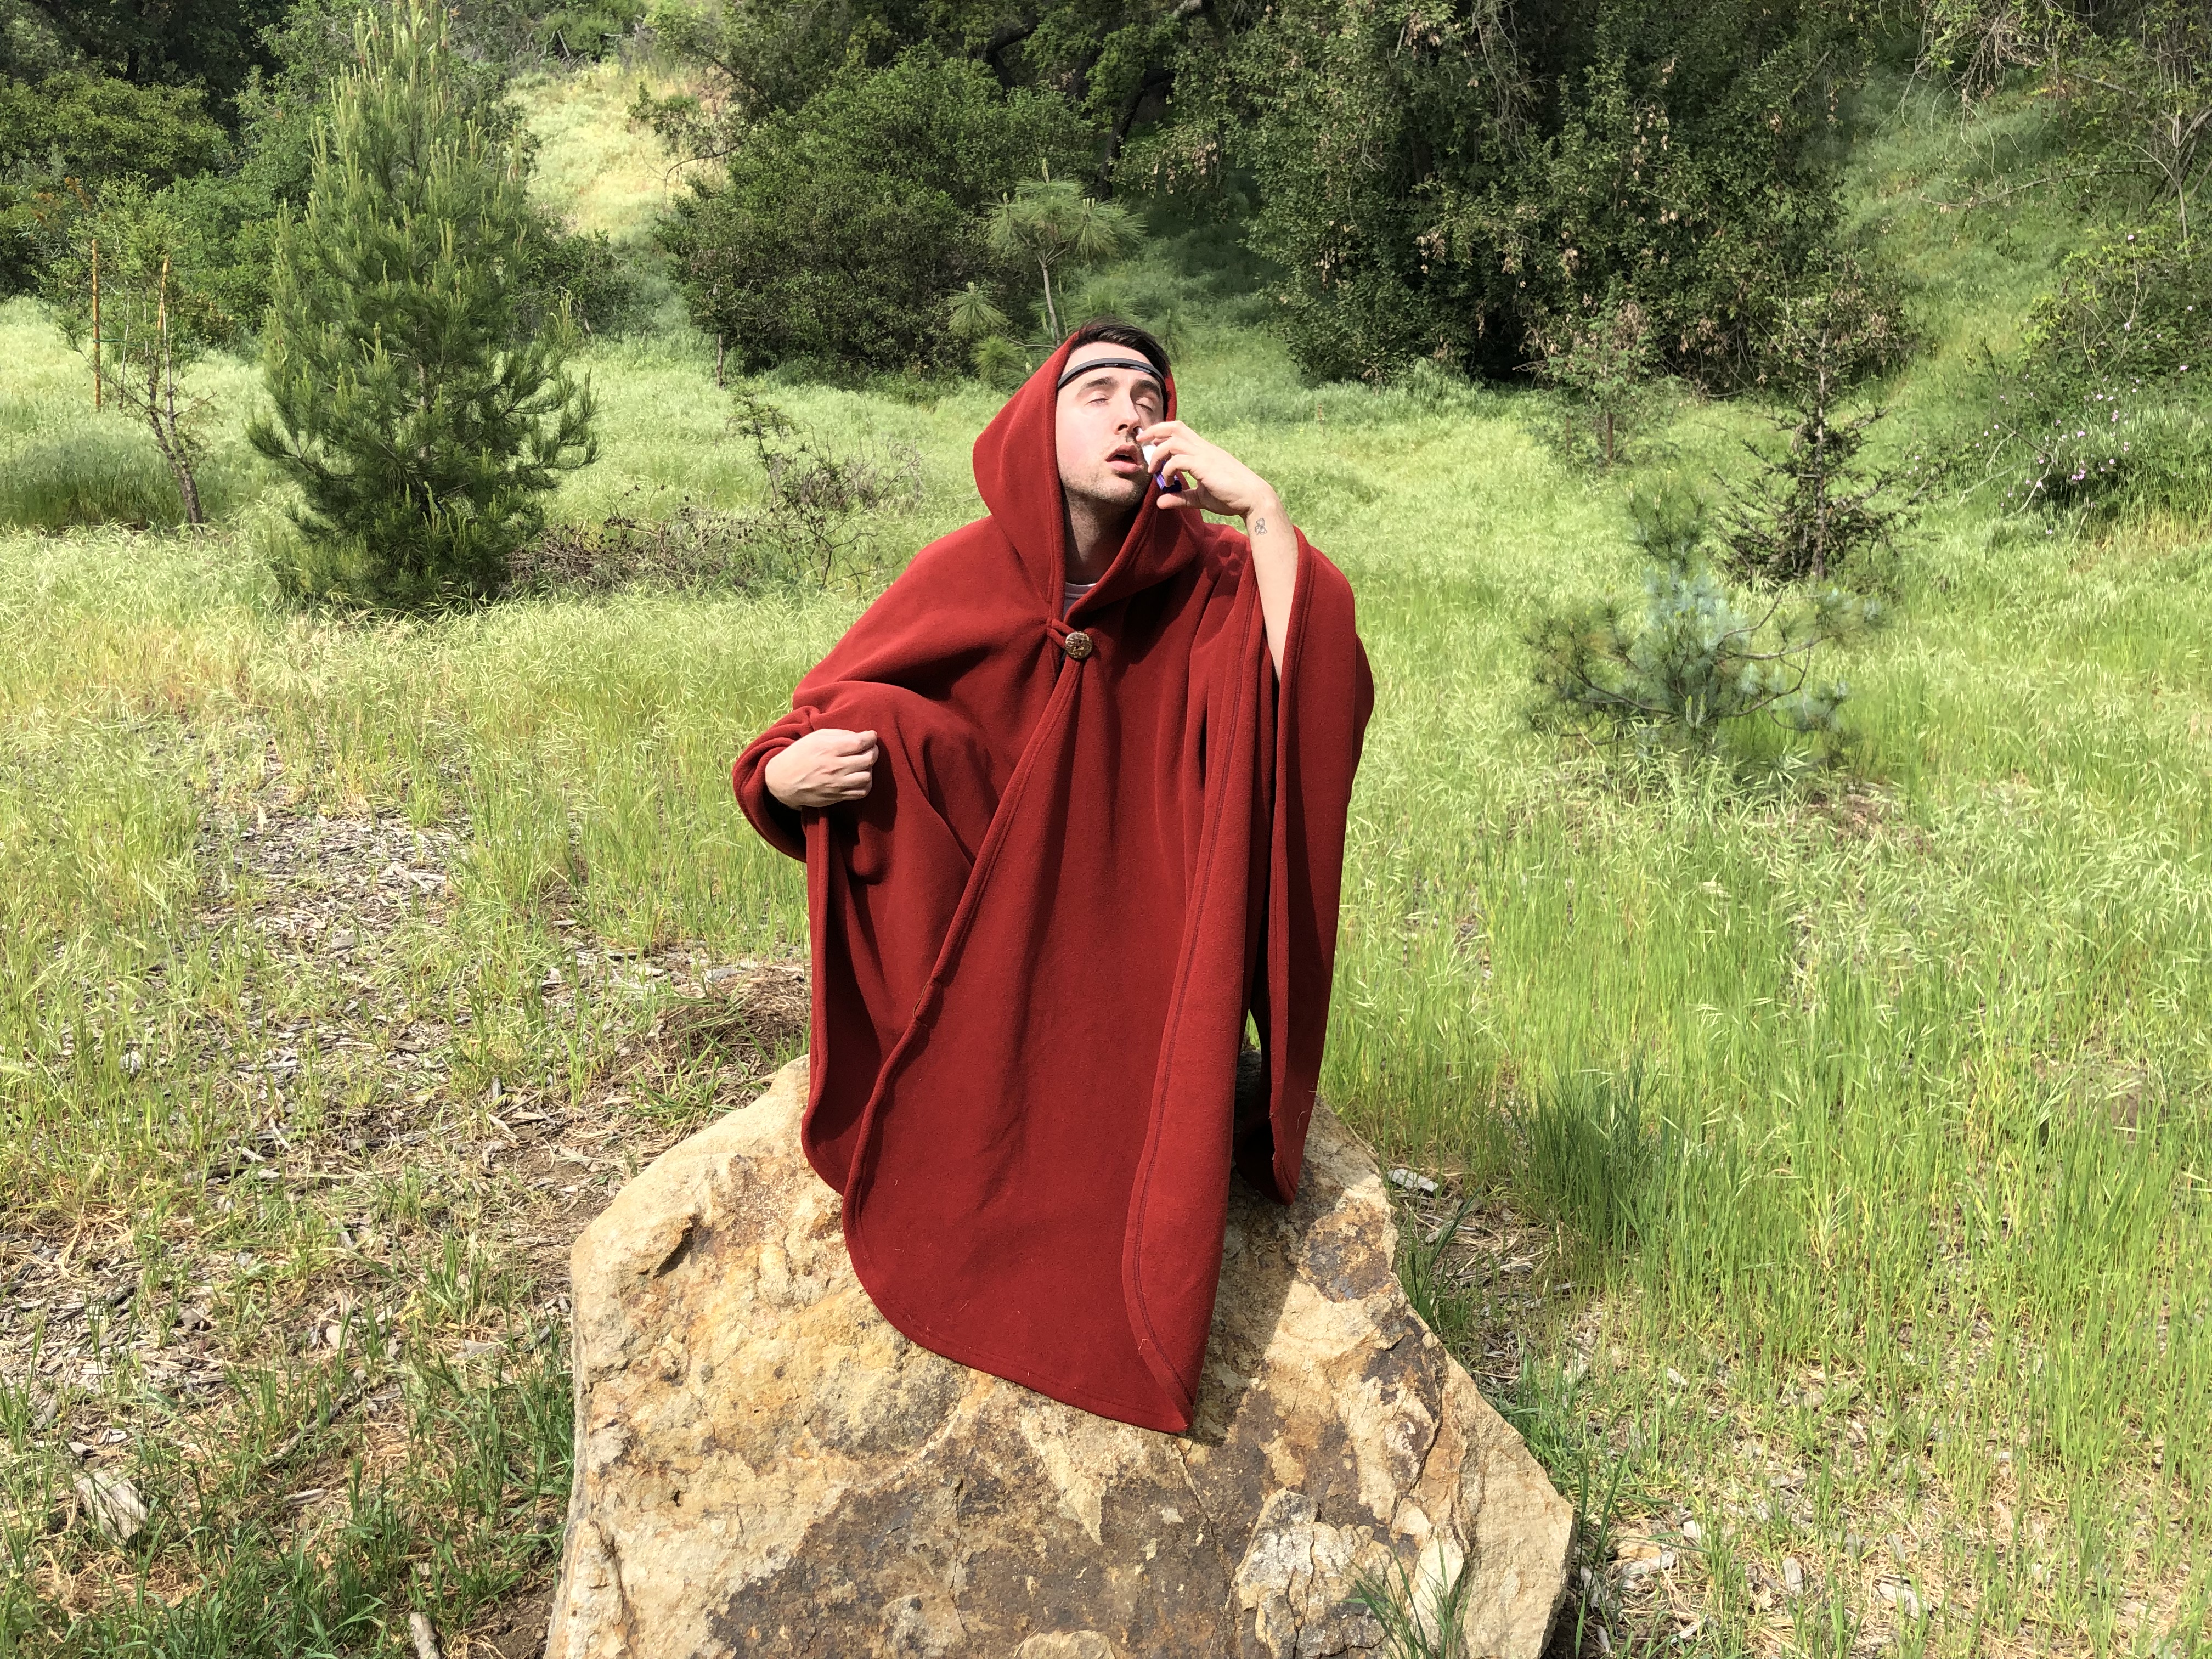 The author crouching on a rock in a red cape